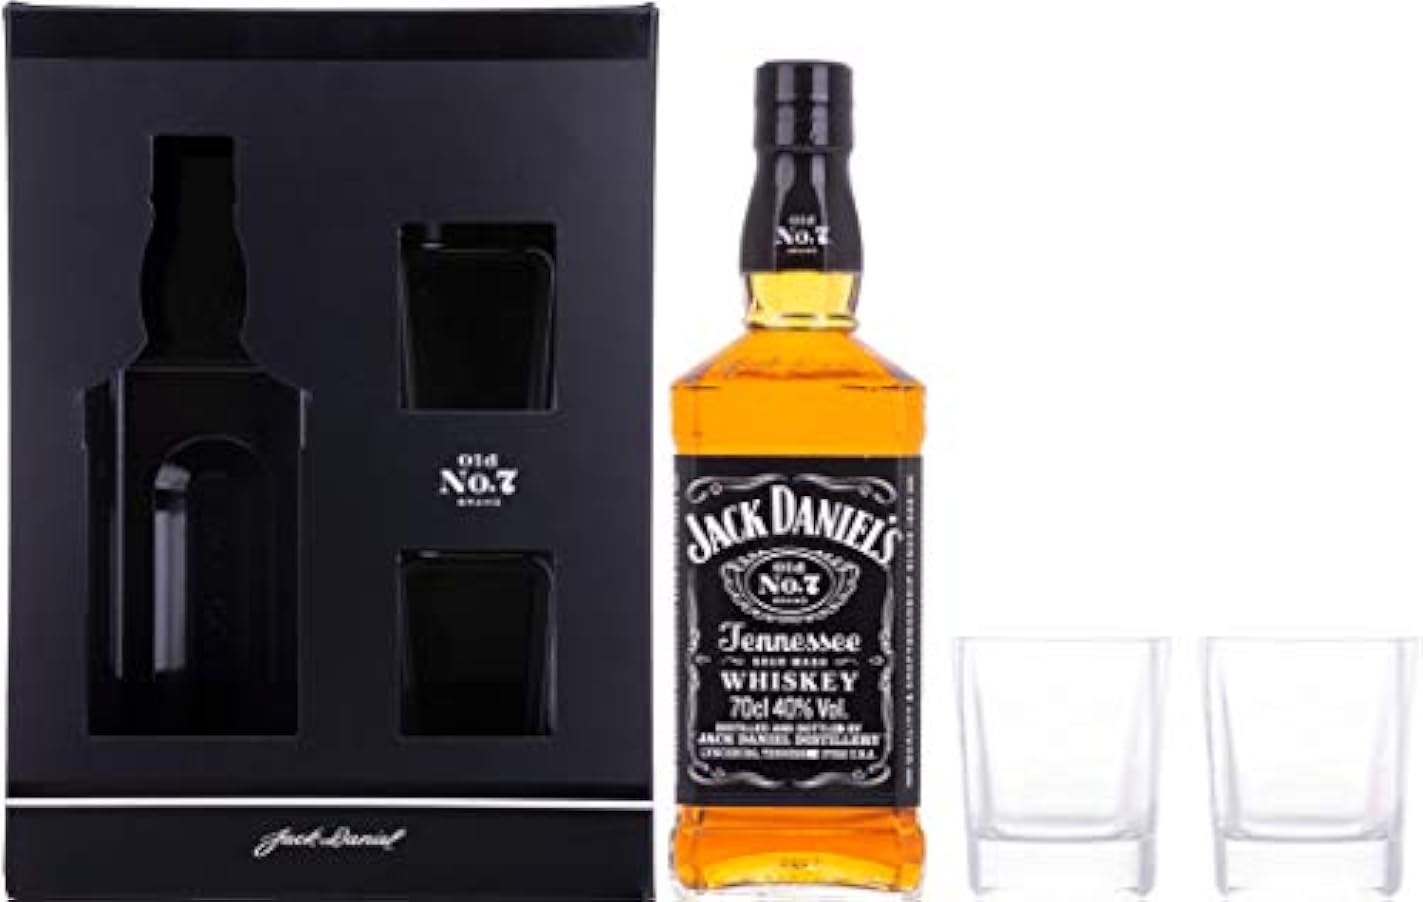 Jack Daniel´s Tennessee Whiskey 40% Vol. 0,7l in Giftbox with Rocking glasses 740340